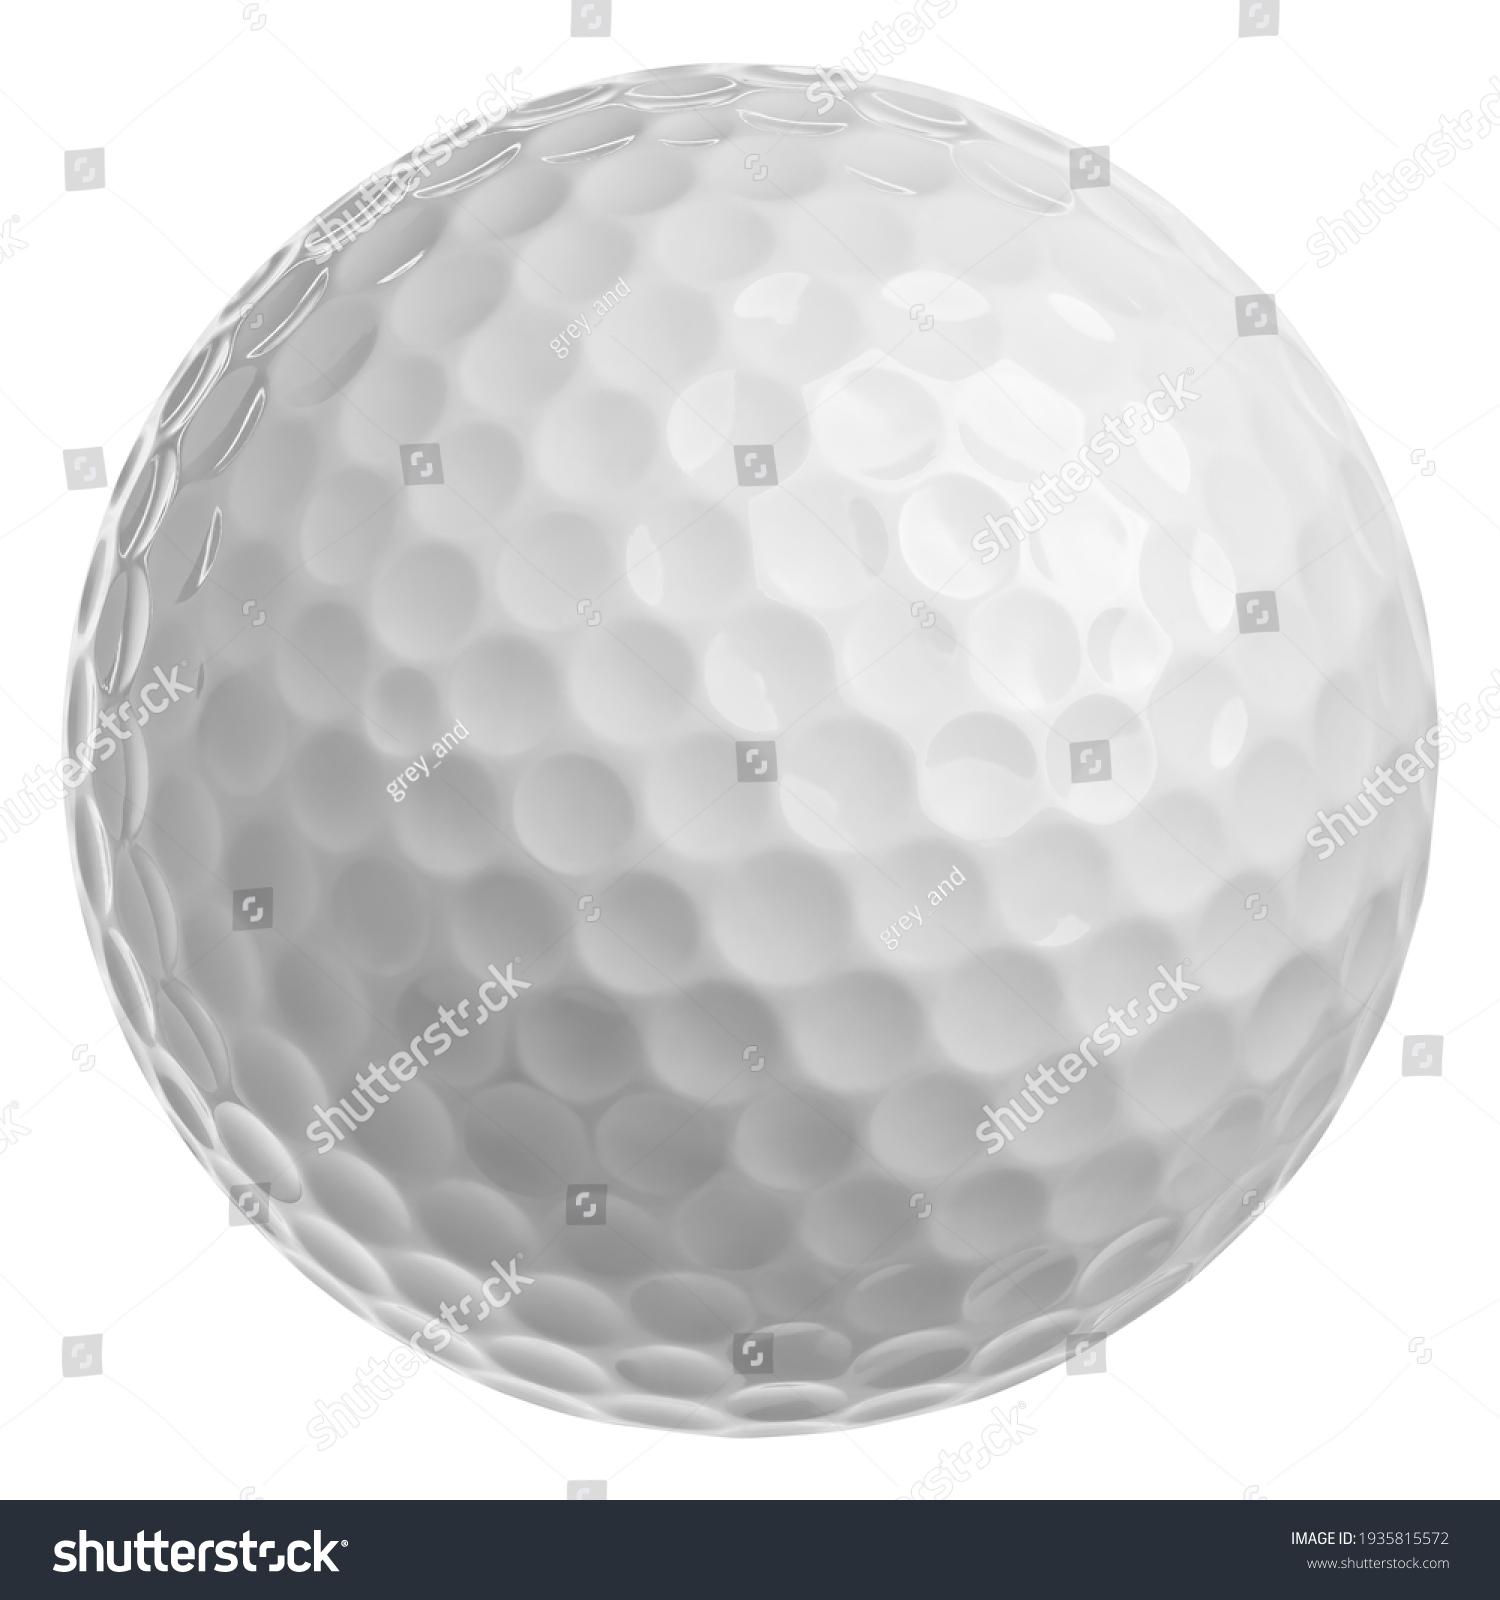 Golf ball isolated on white background, full depth of field, clipping path #1935815572